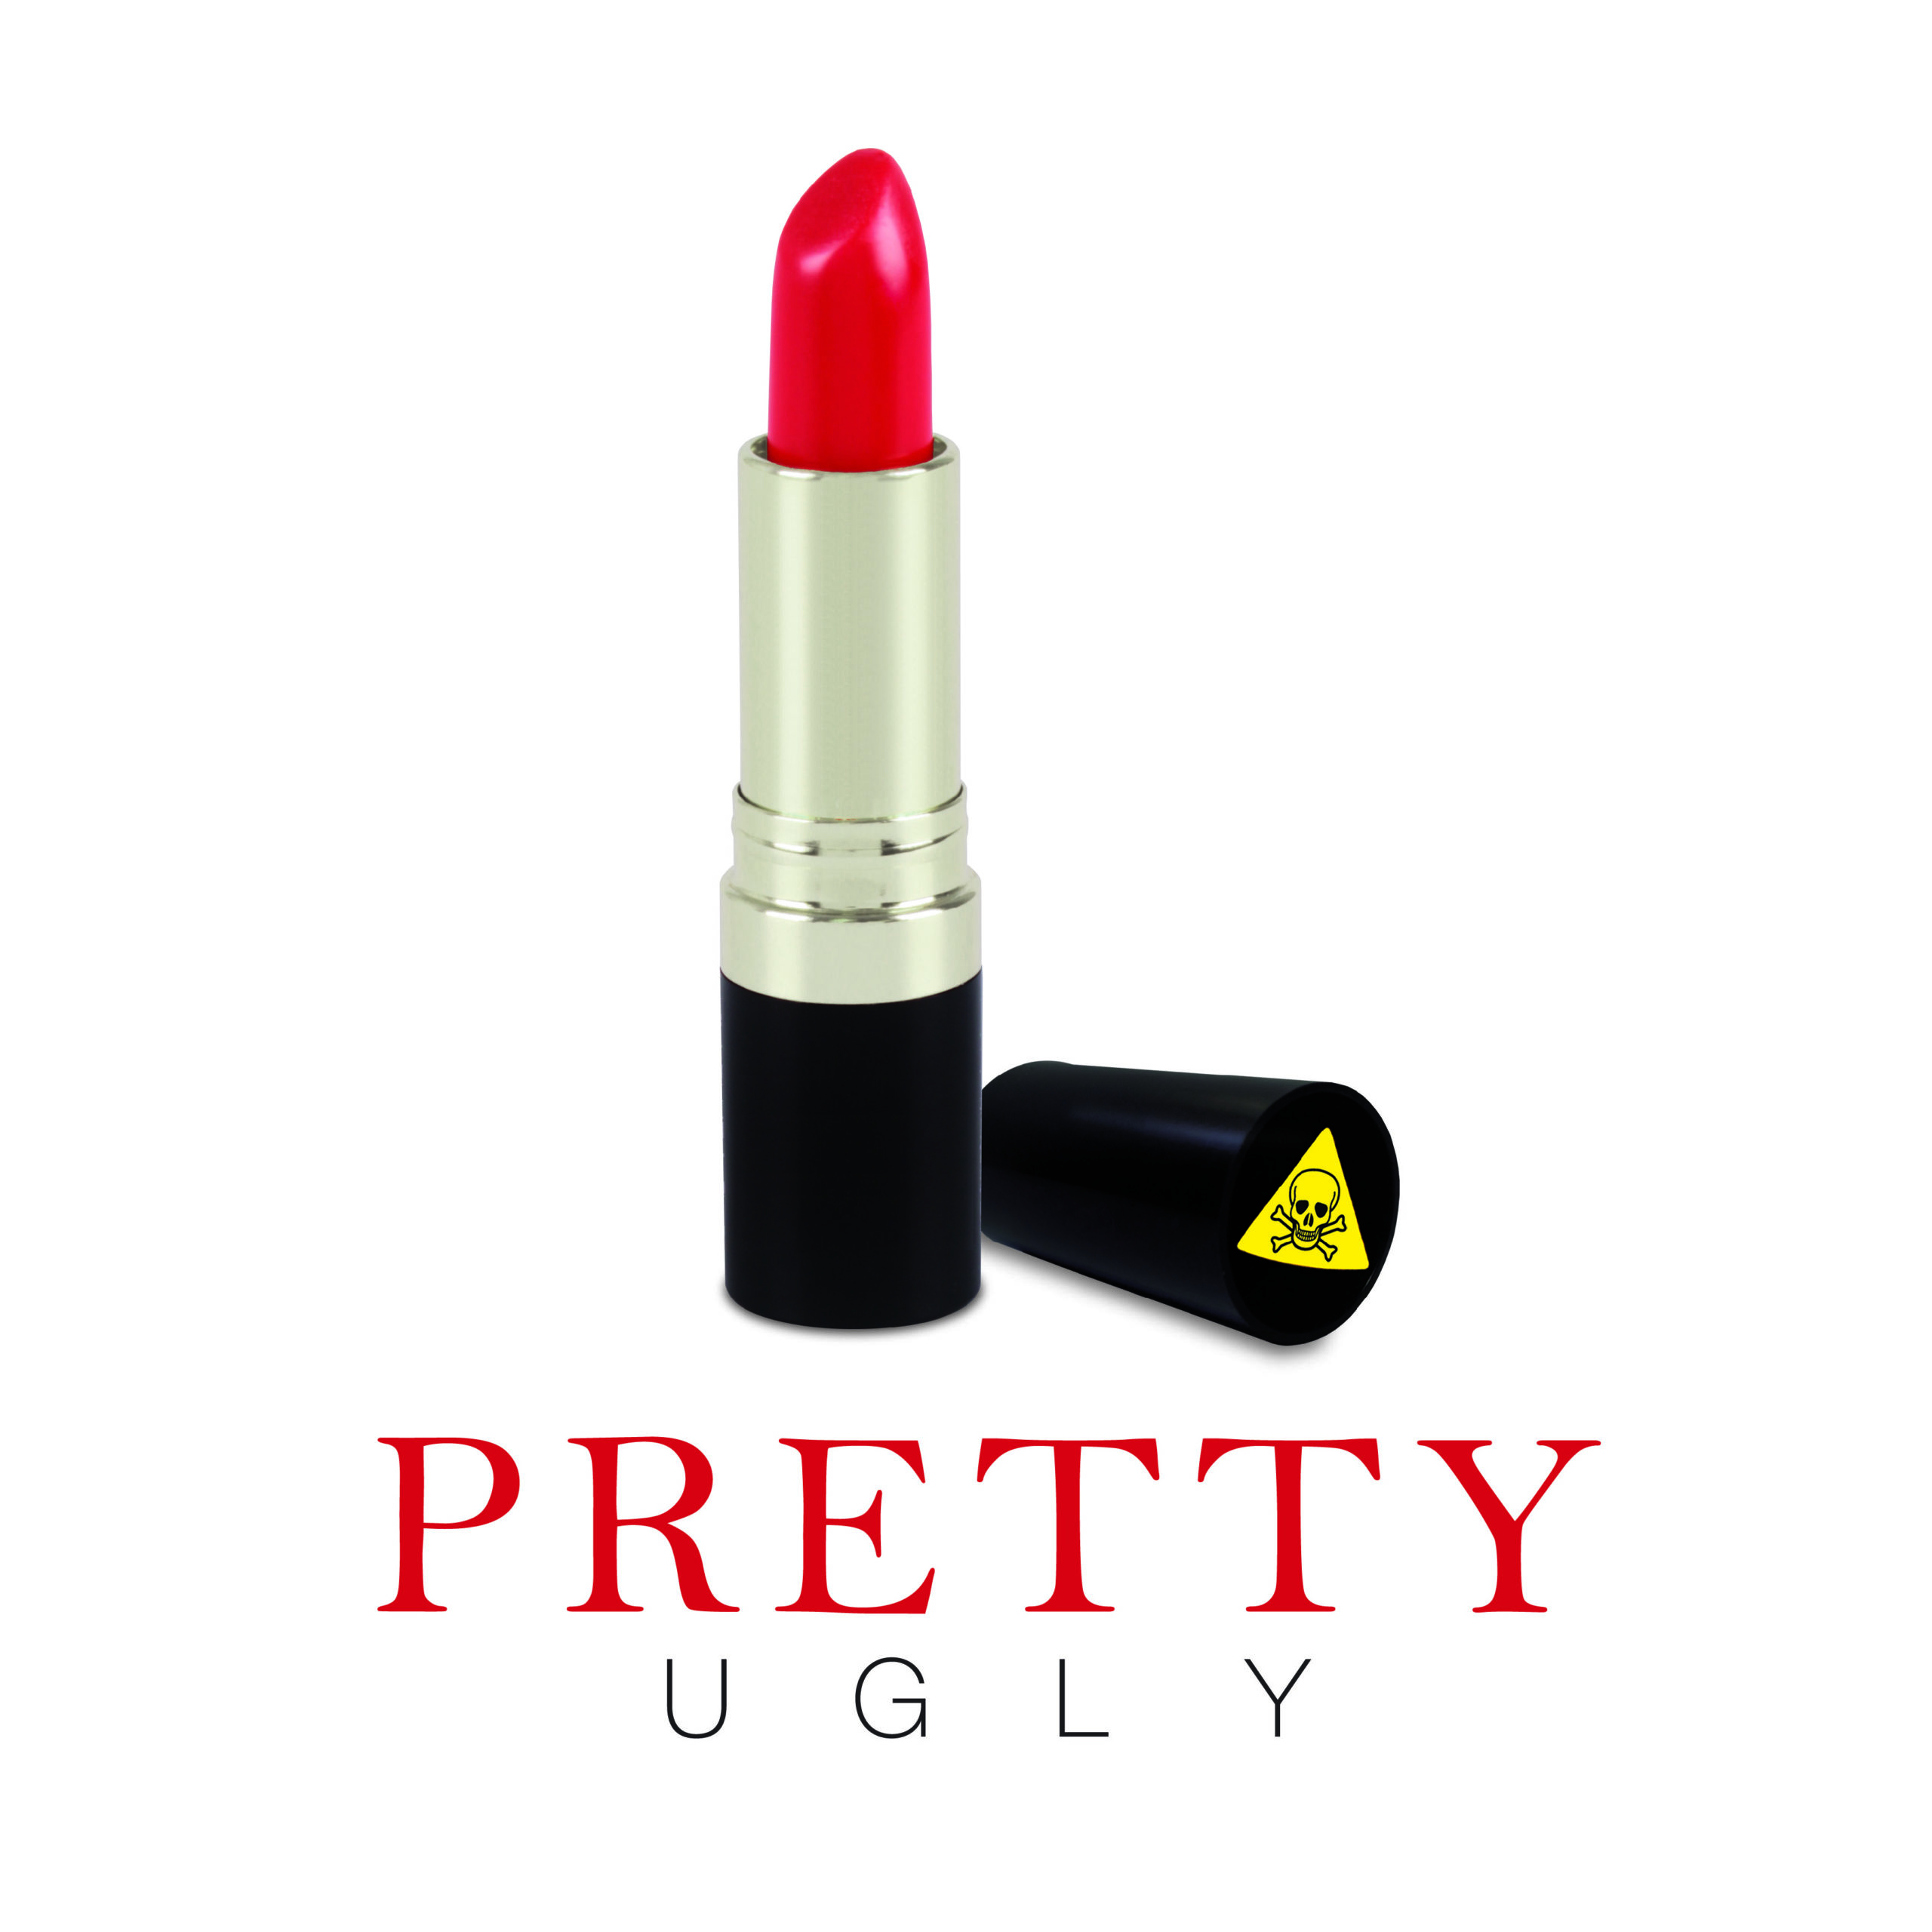 Pretty Ugly, the Film